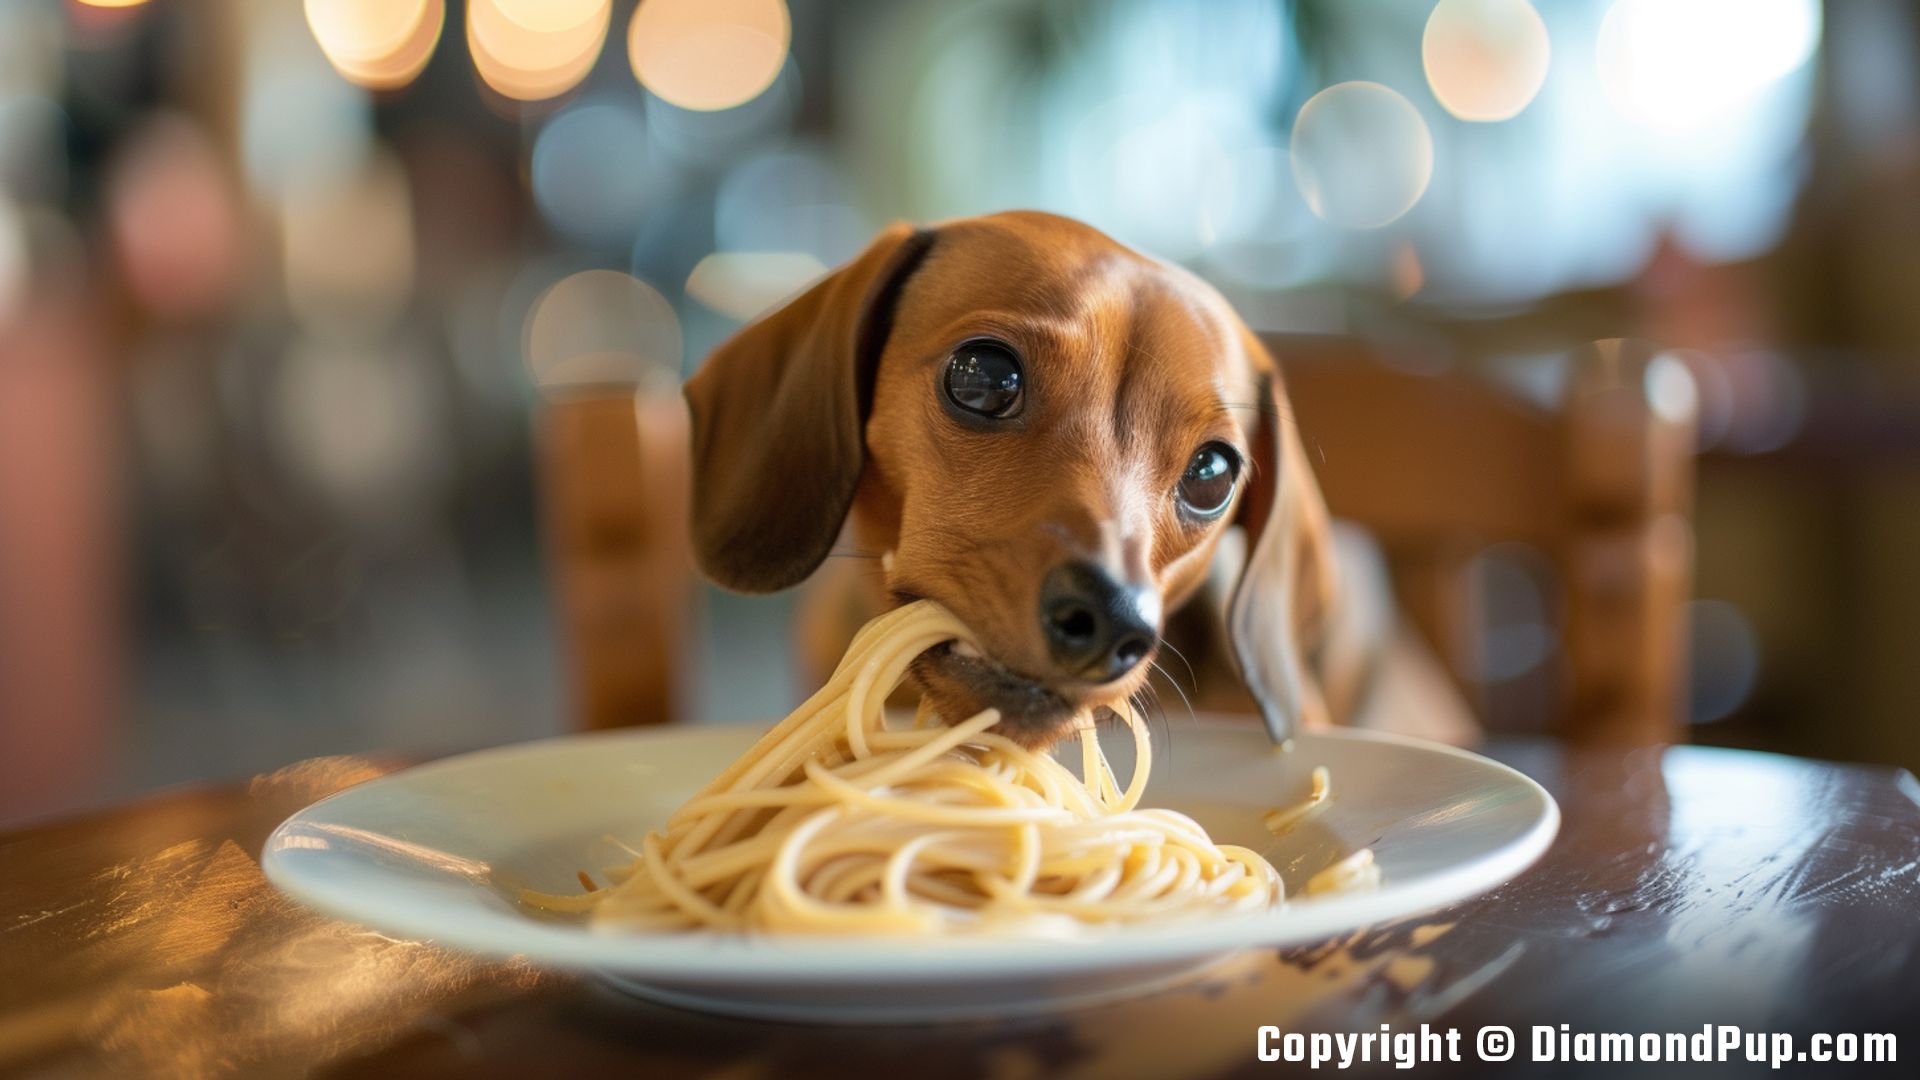 Image of an Adorable Dachshund Eating Pasta